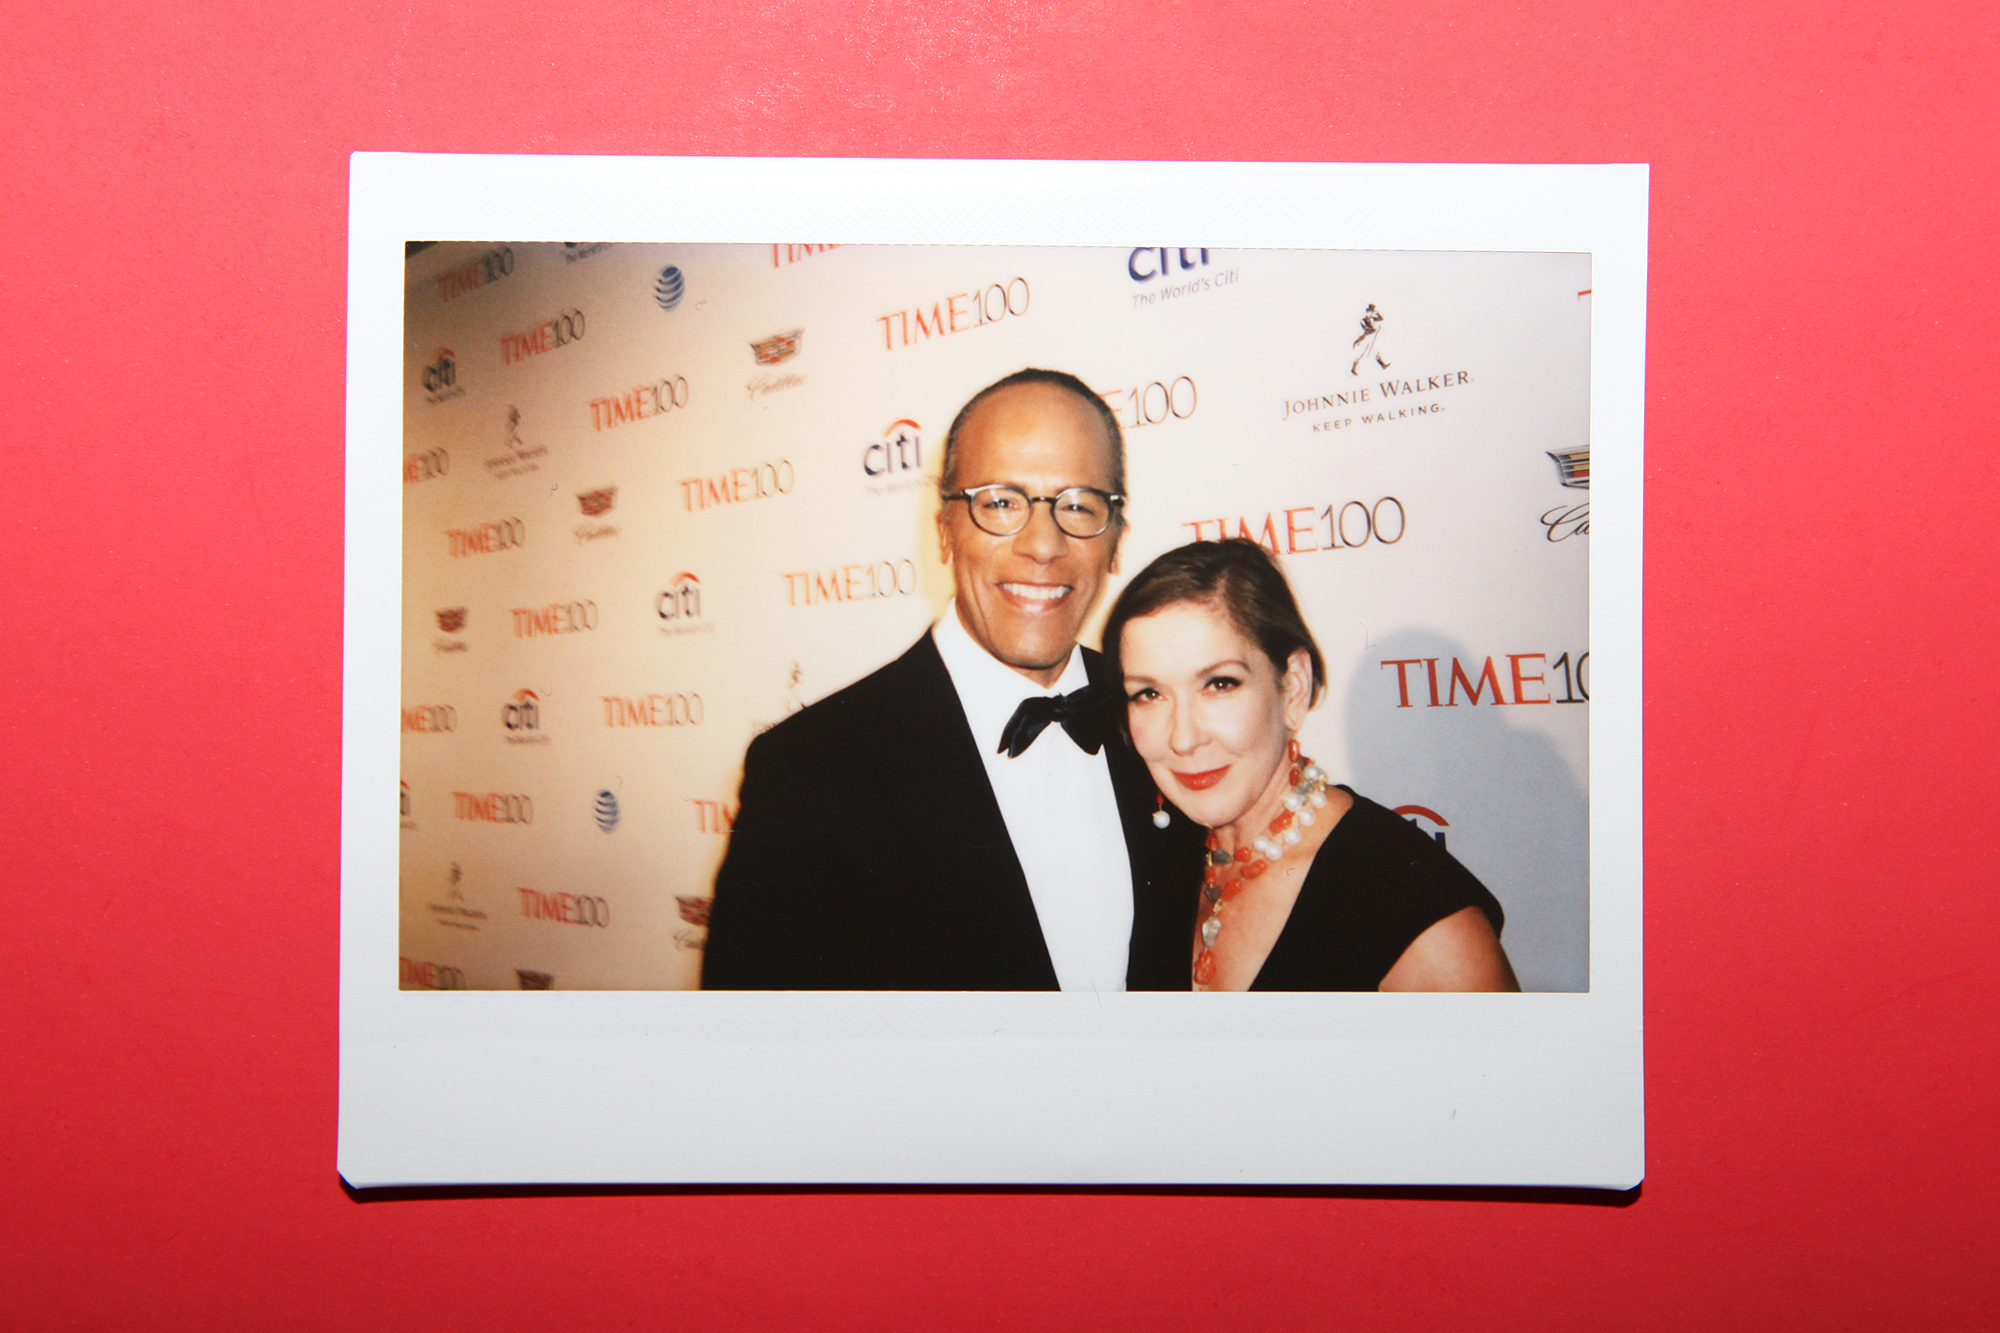 Lester Holt and Carol Hagen arrive at the TIME 100 Gala at the Time Warner Center on April 26, 2016 in New York City.